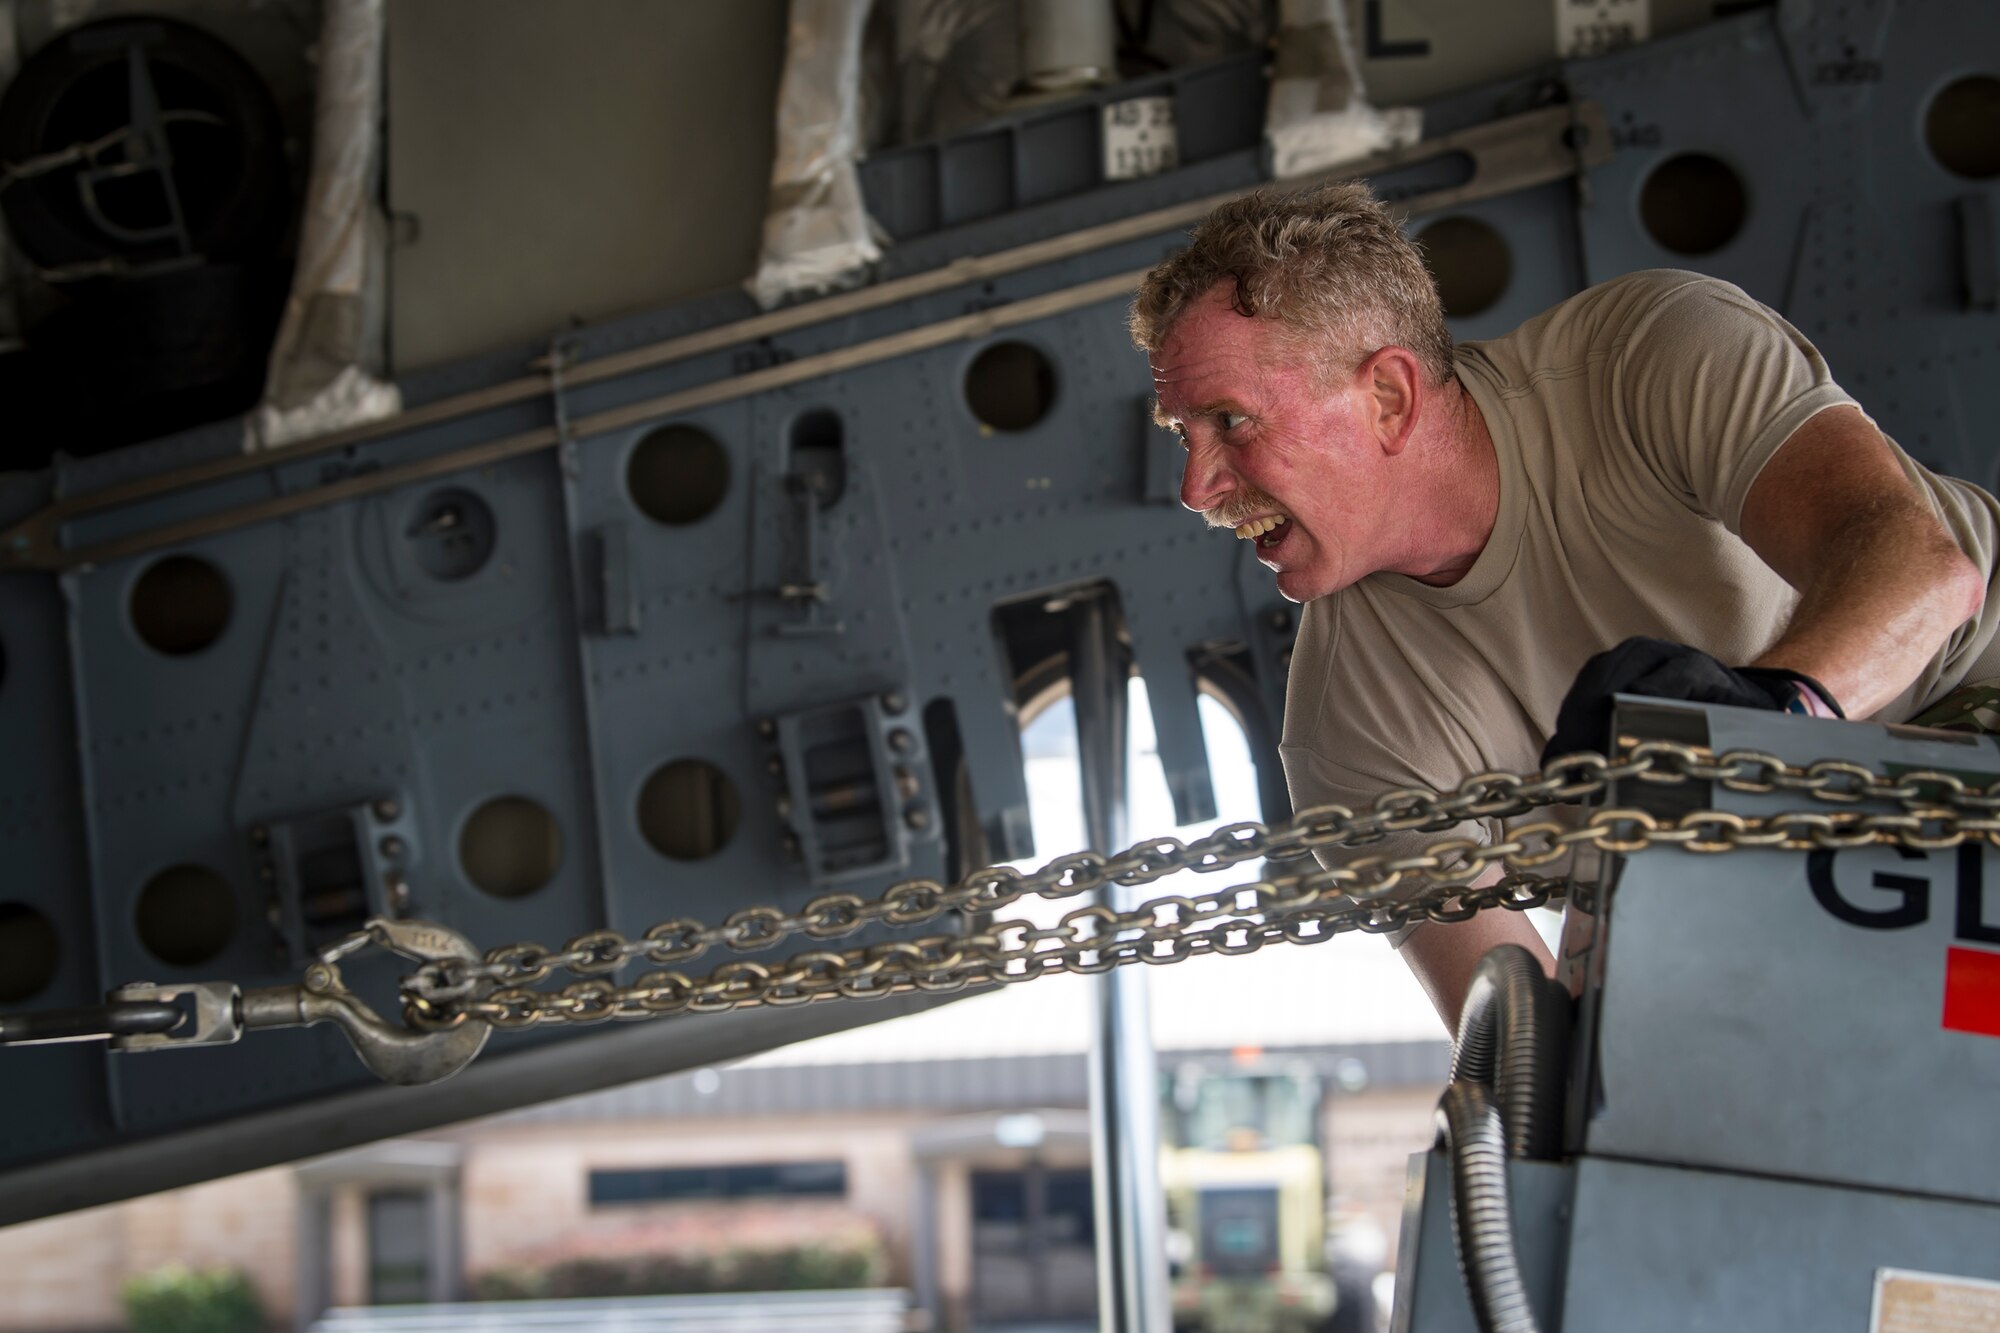 Master Sgt. Robert Kinsley, 155th Airlift Squadron loadmaster, Memphis Air National Guard Base, TN, pushes cargo up the ramp of a C-17 Globemaster III, July 5, 2018, at Moody Air Force Base, Ga. Airmen loaded approximately 68,000 pounds of cargo onto a C-17 Globemaster III to aid the 75th Fighter Squadron (FS) prior to a deployment. The 75th FS and supporting units recently deployed to an undisclosed location in support of Operation Spartan Shield. (U.S. Air Force photo by Airman 1st Class Eugene Oliver)